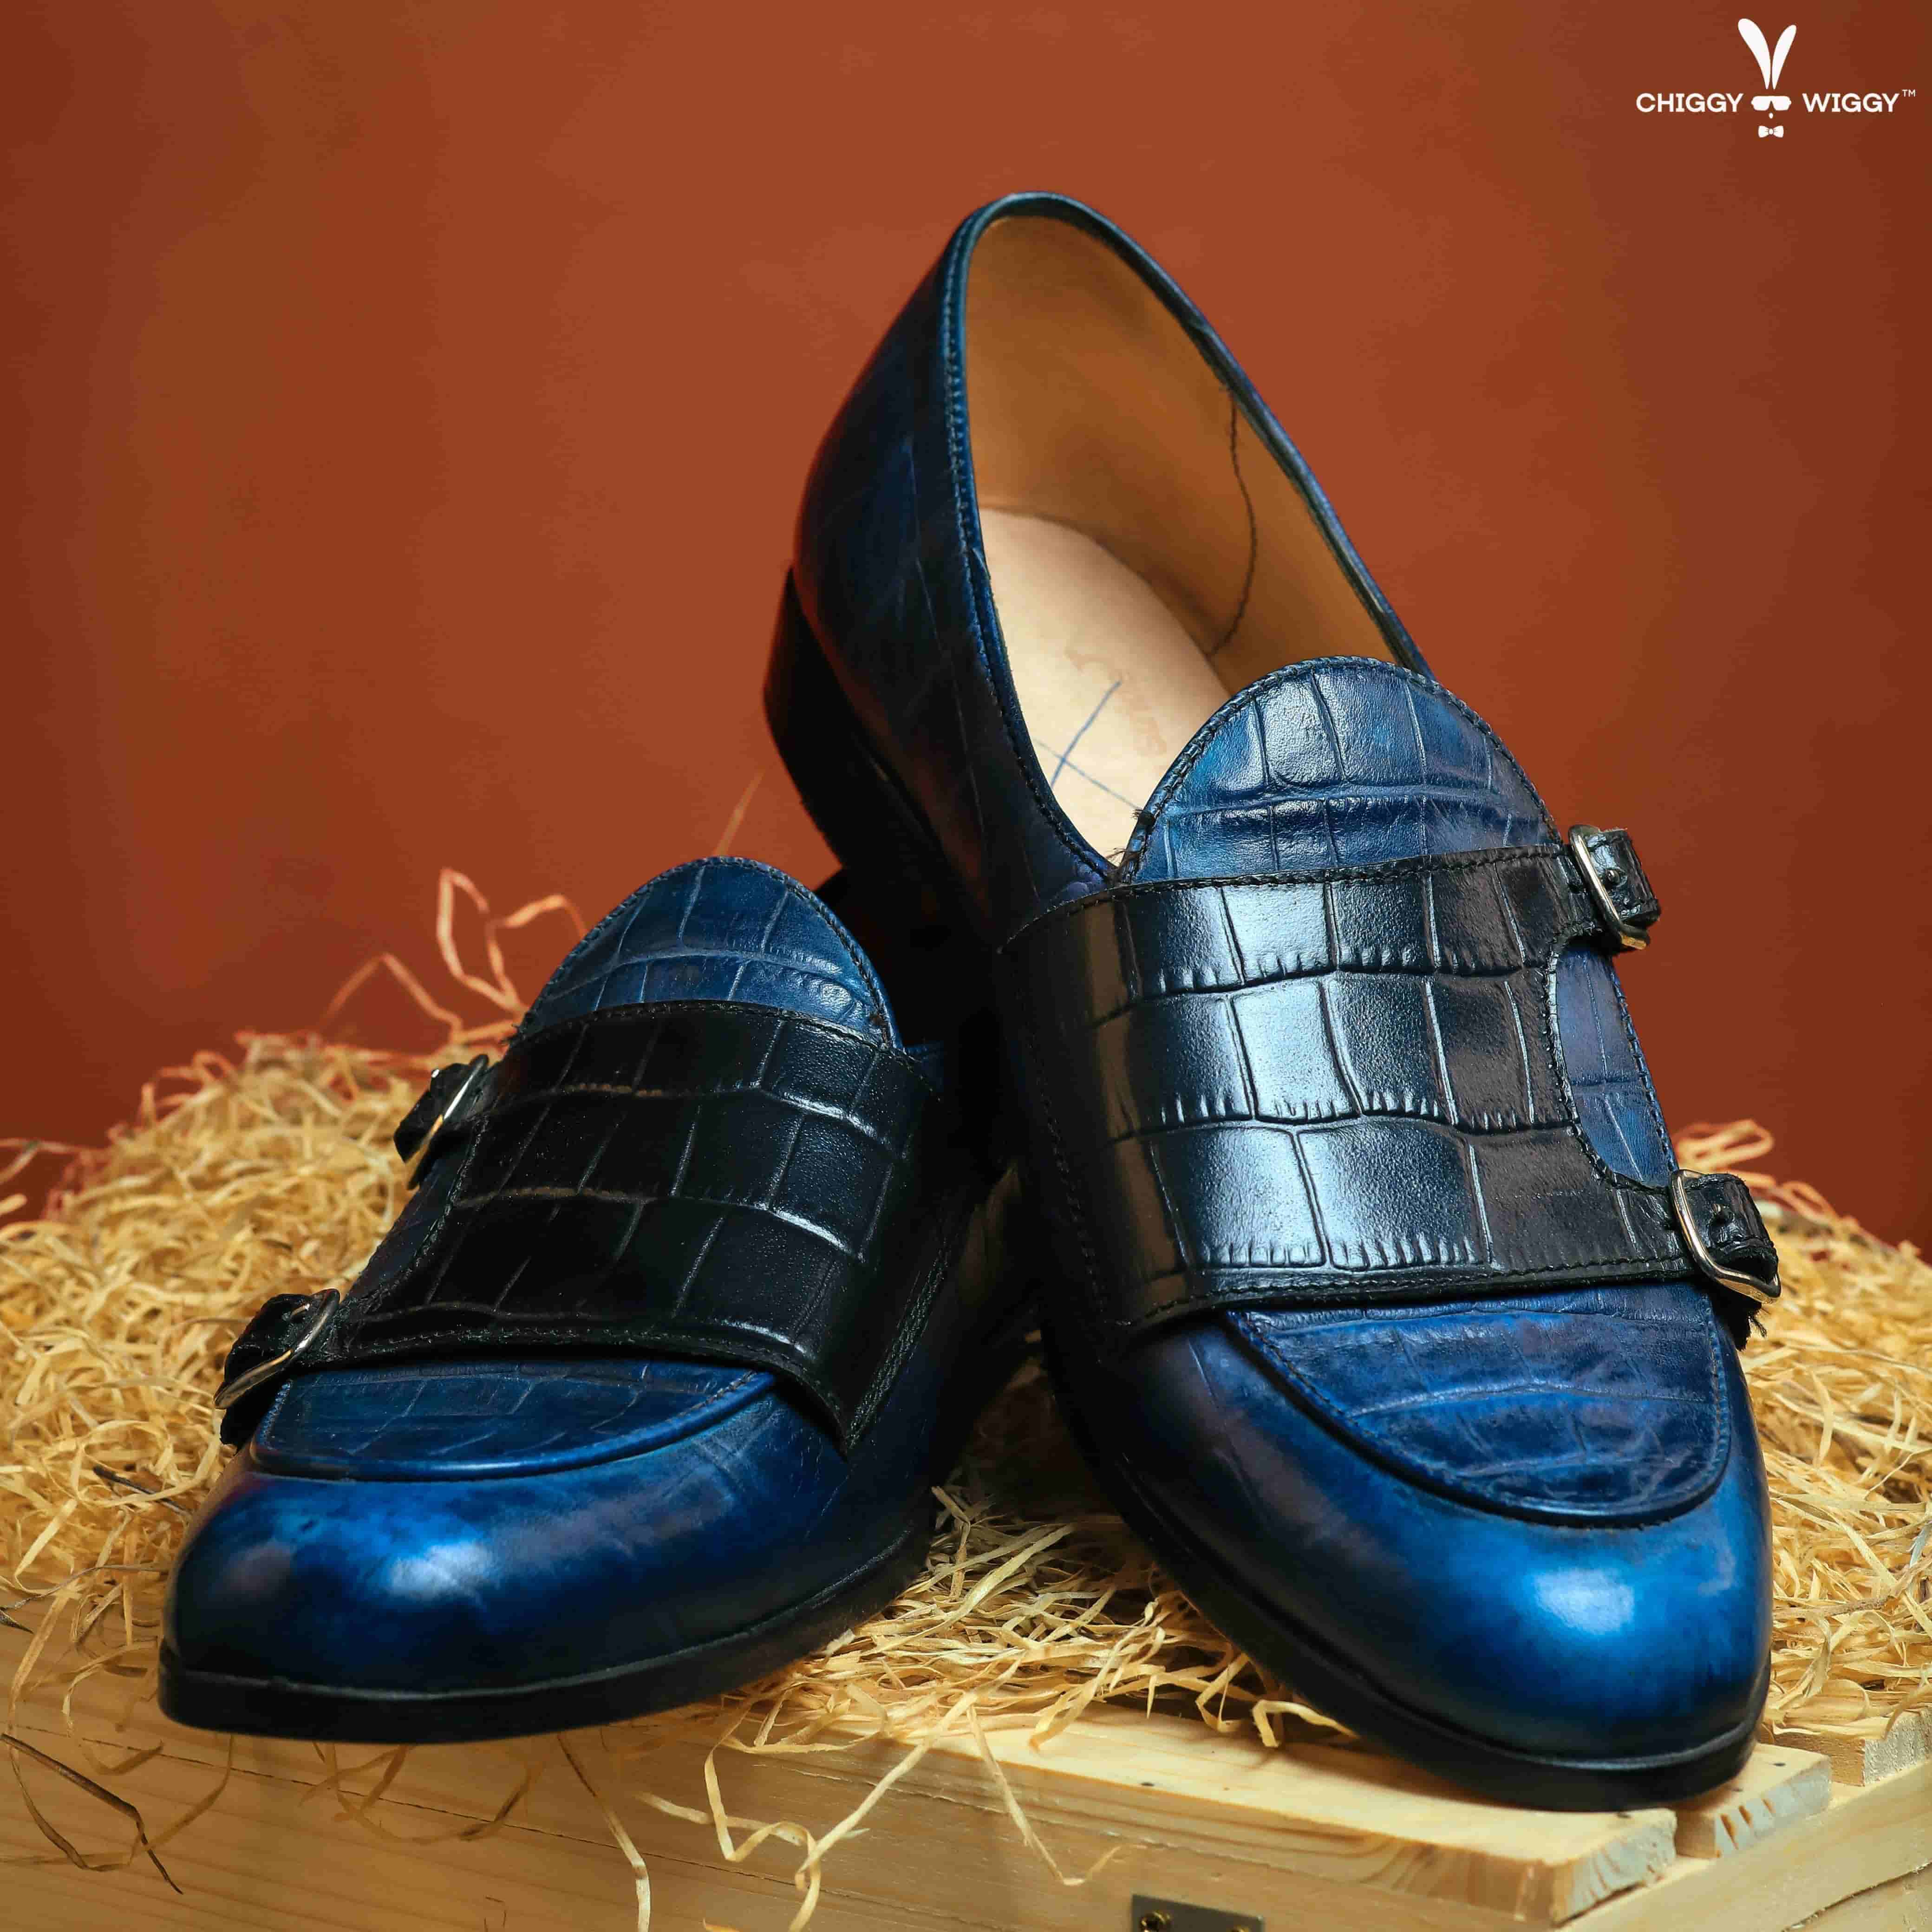 croc-print-blue-patina-monk-loafer-original-leather-sole-leather-the-chiggy-wiggy-monkstrape-shoes-1